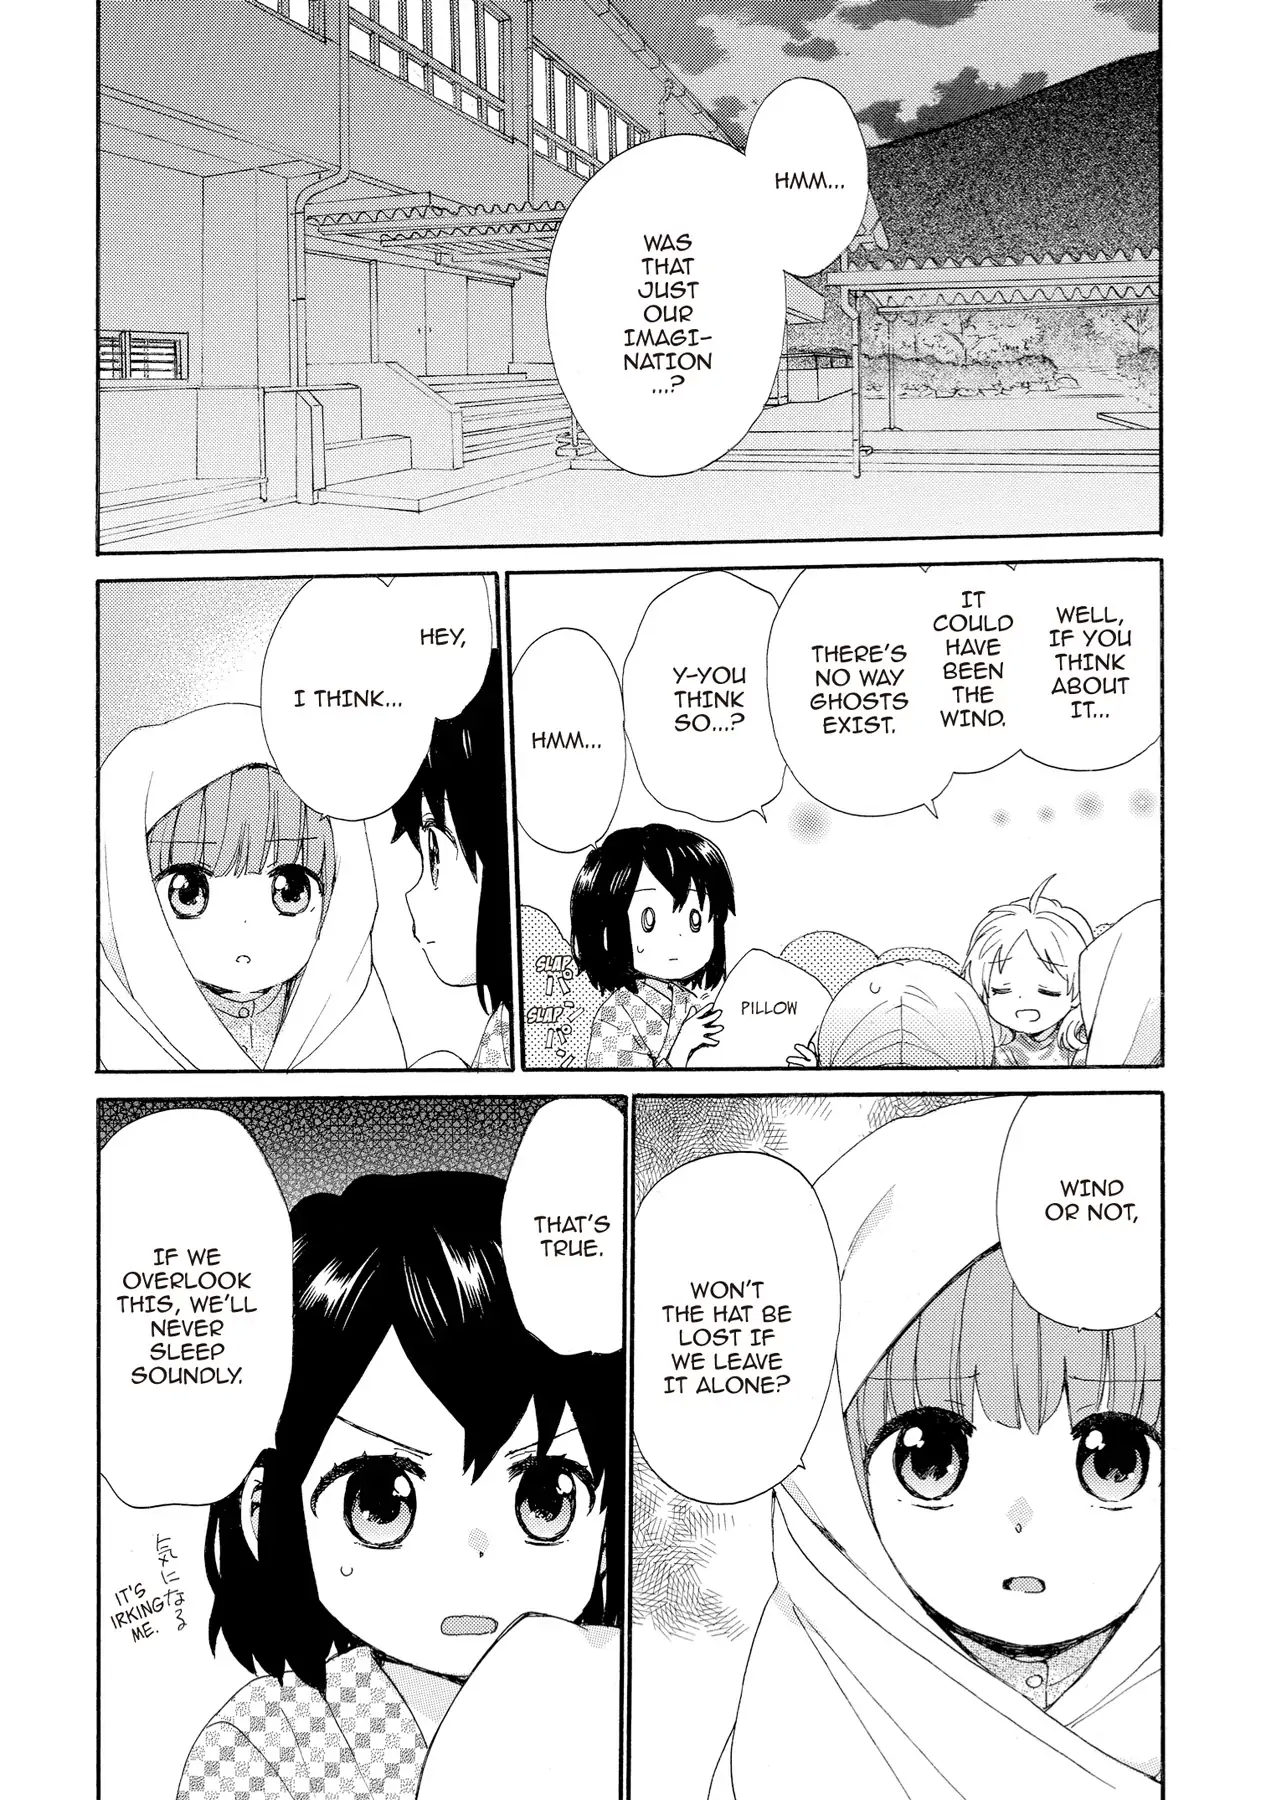 The Cute Little Granny Girl Hinata-chan - chapter 55 - #2